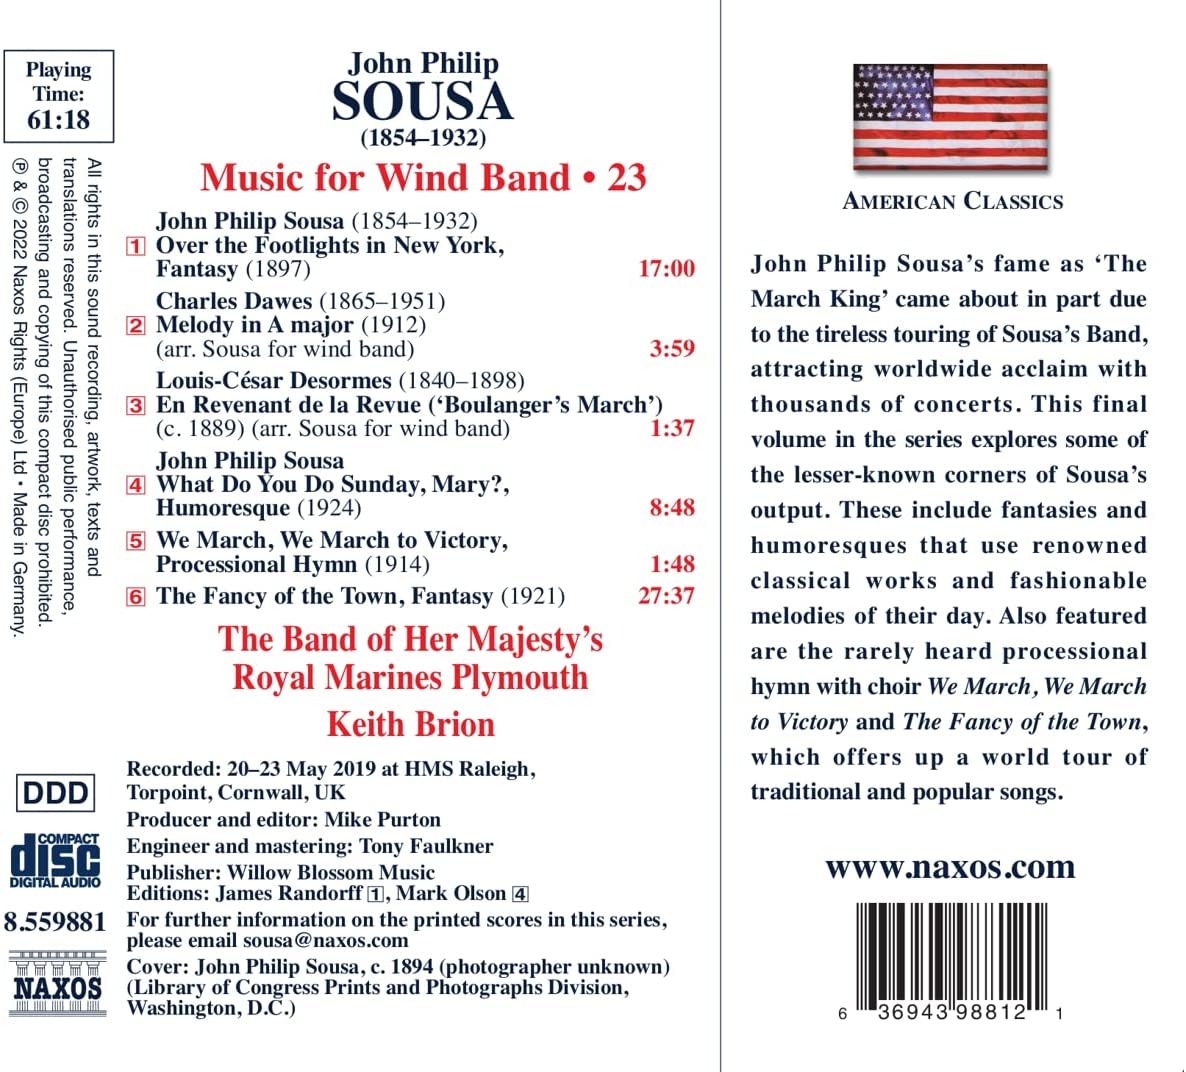 The Band of Her Majesty′s Royal Marines Plymouth 존 필립 수자: 관악 밴드를 위한 작품 23집 (John Philip Sousa: Music For Wind Band Music 23) 